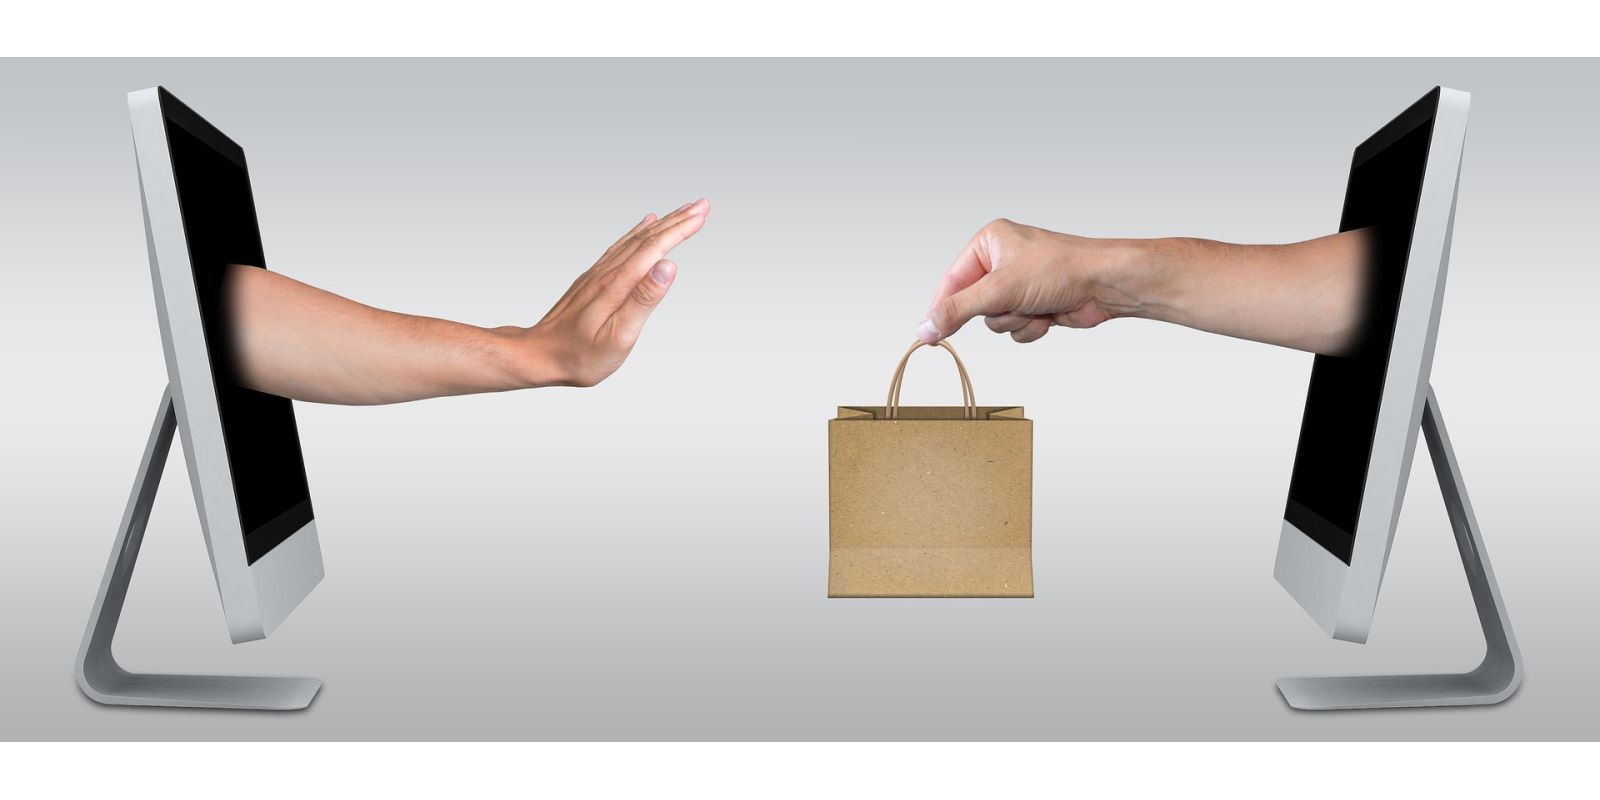 hand refusing a shopping bag offered by another hand coming out of a computer screen